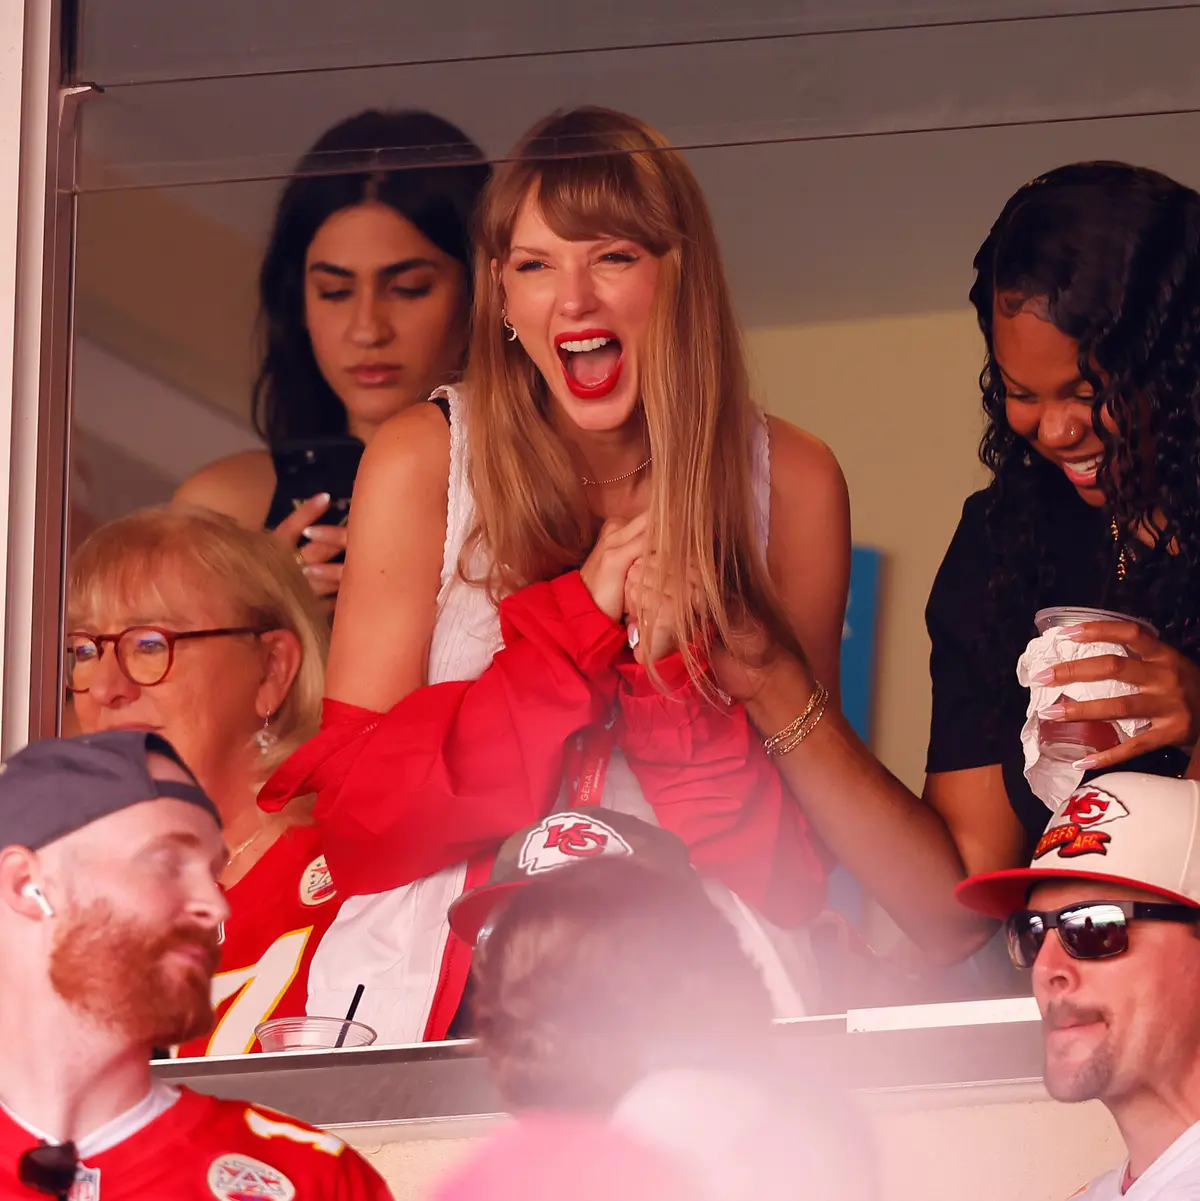 Singer Taylor Swift appears to be in love once again.